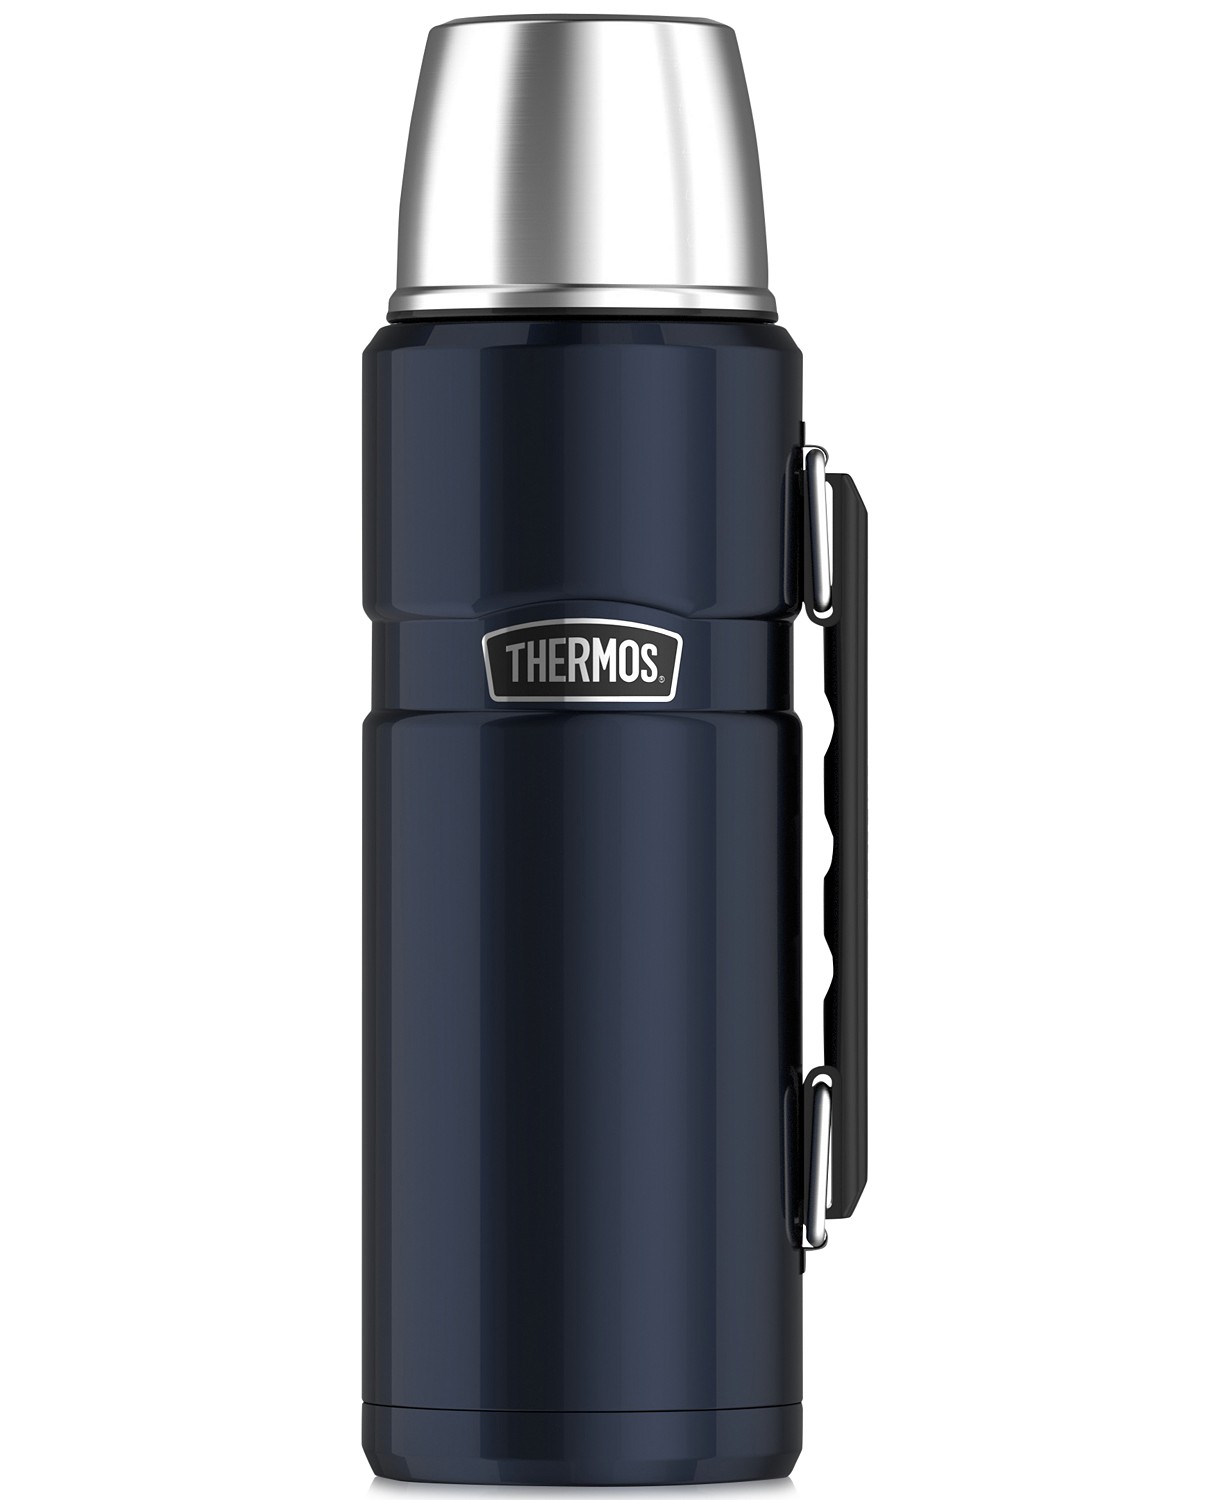 Thermos Stainless Steel Beverage Bottle